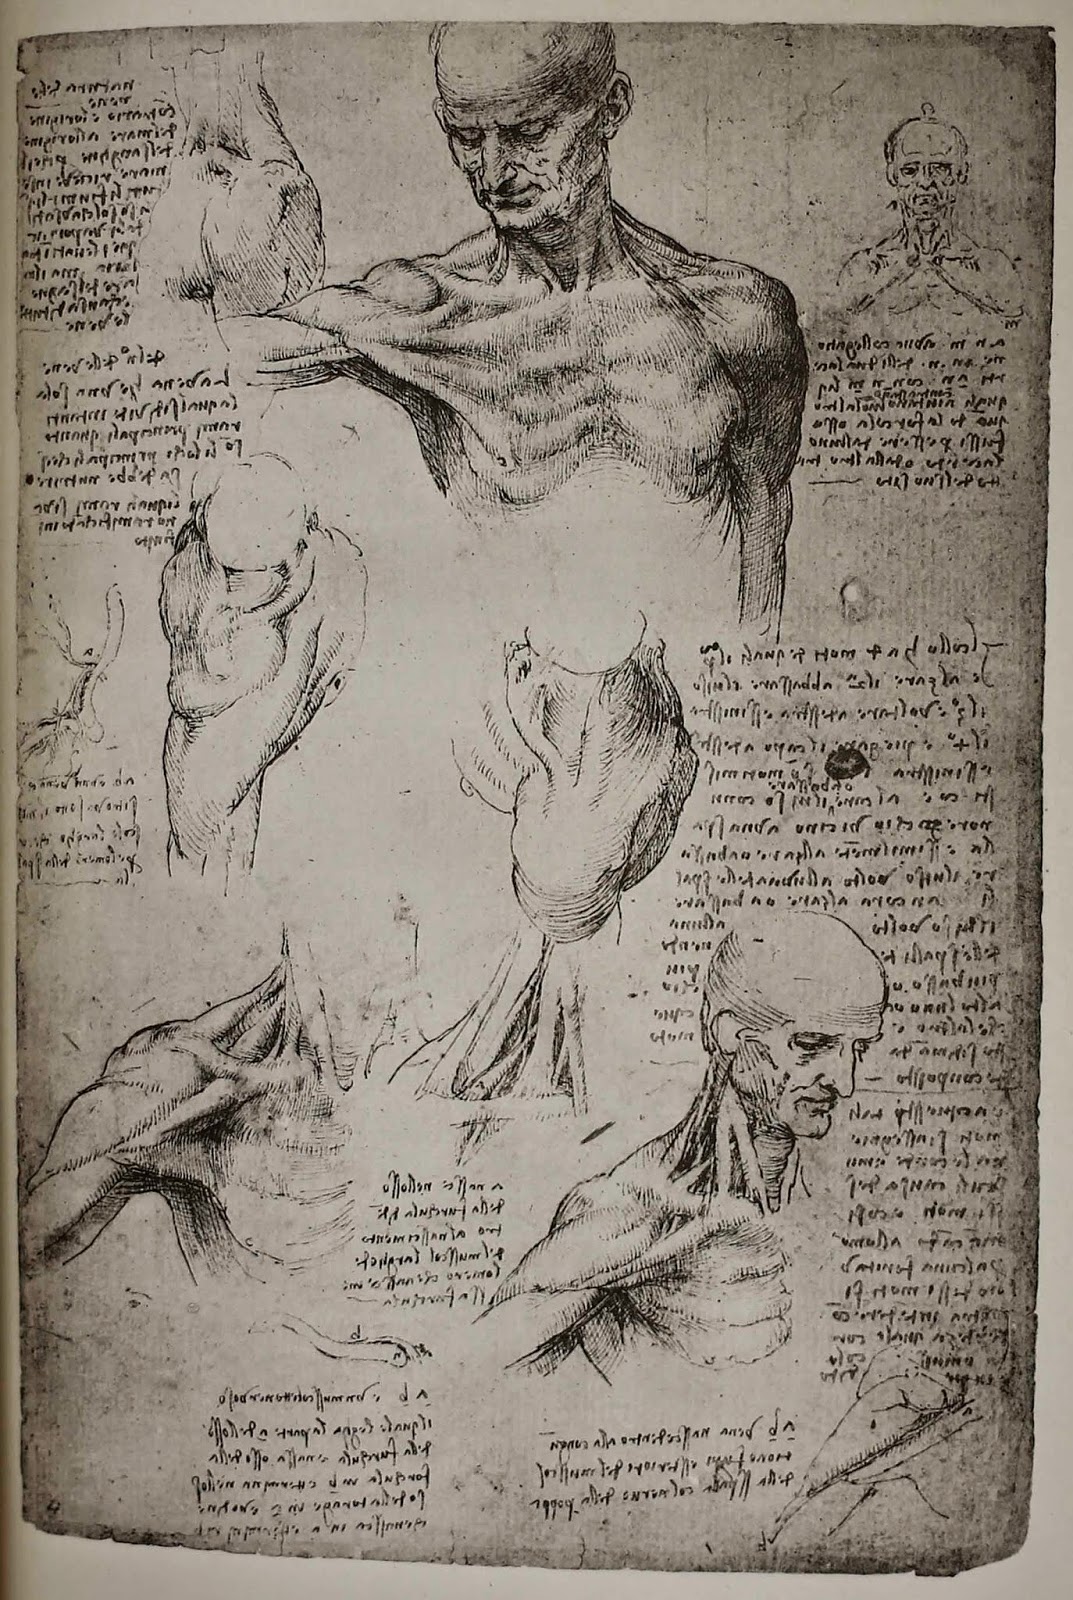 A page from Da Vinci's Codice Dell'anatomia containing anatomical drawings and handwritten text.